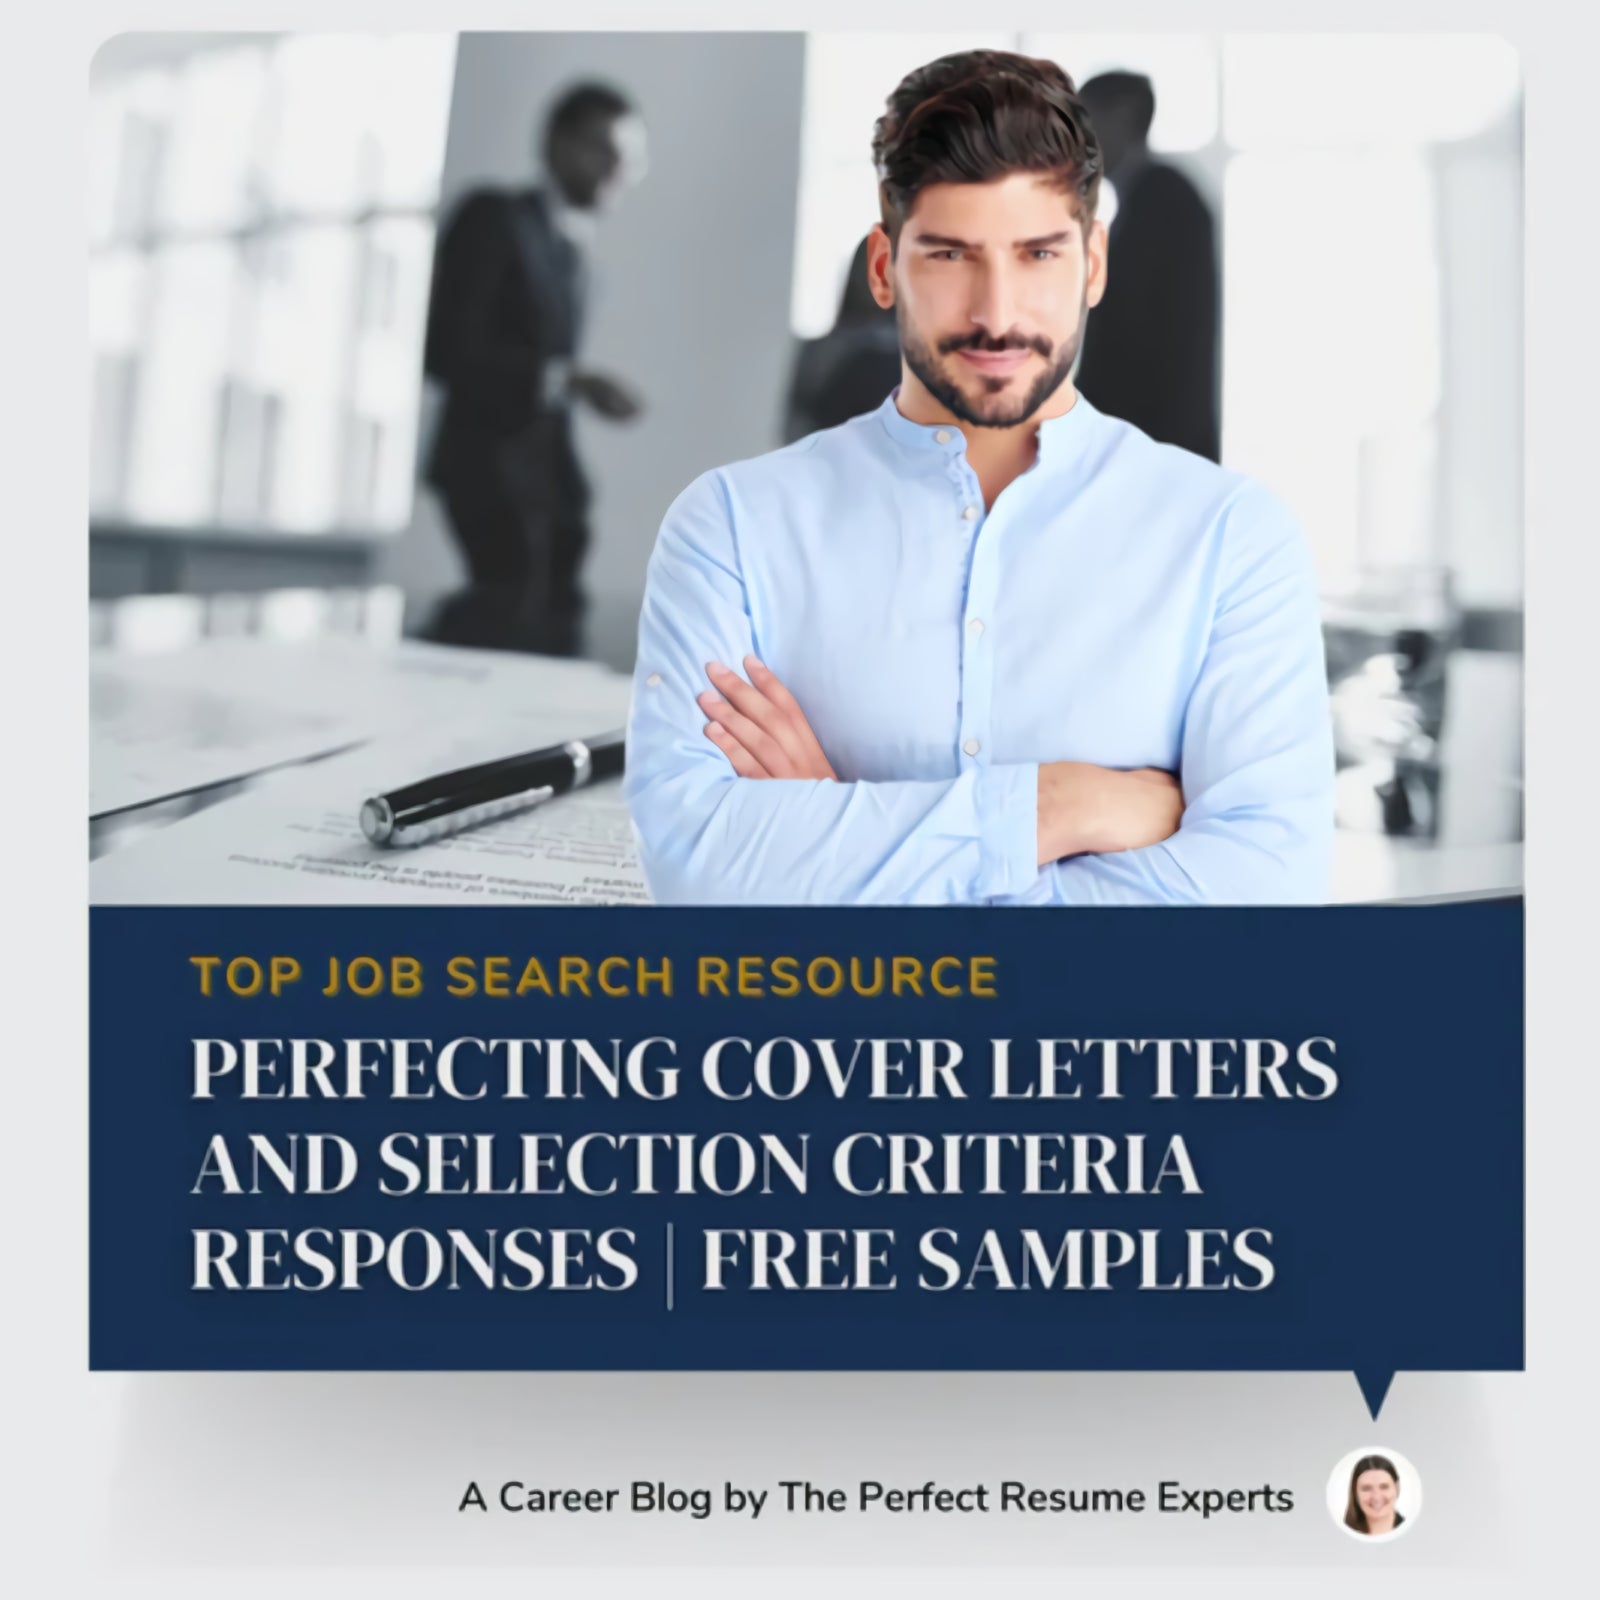 LETTERS AND SELECTION CRITERIA RESPONSES | FREE SAMPLES